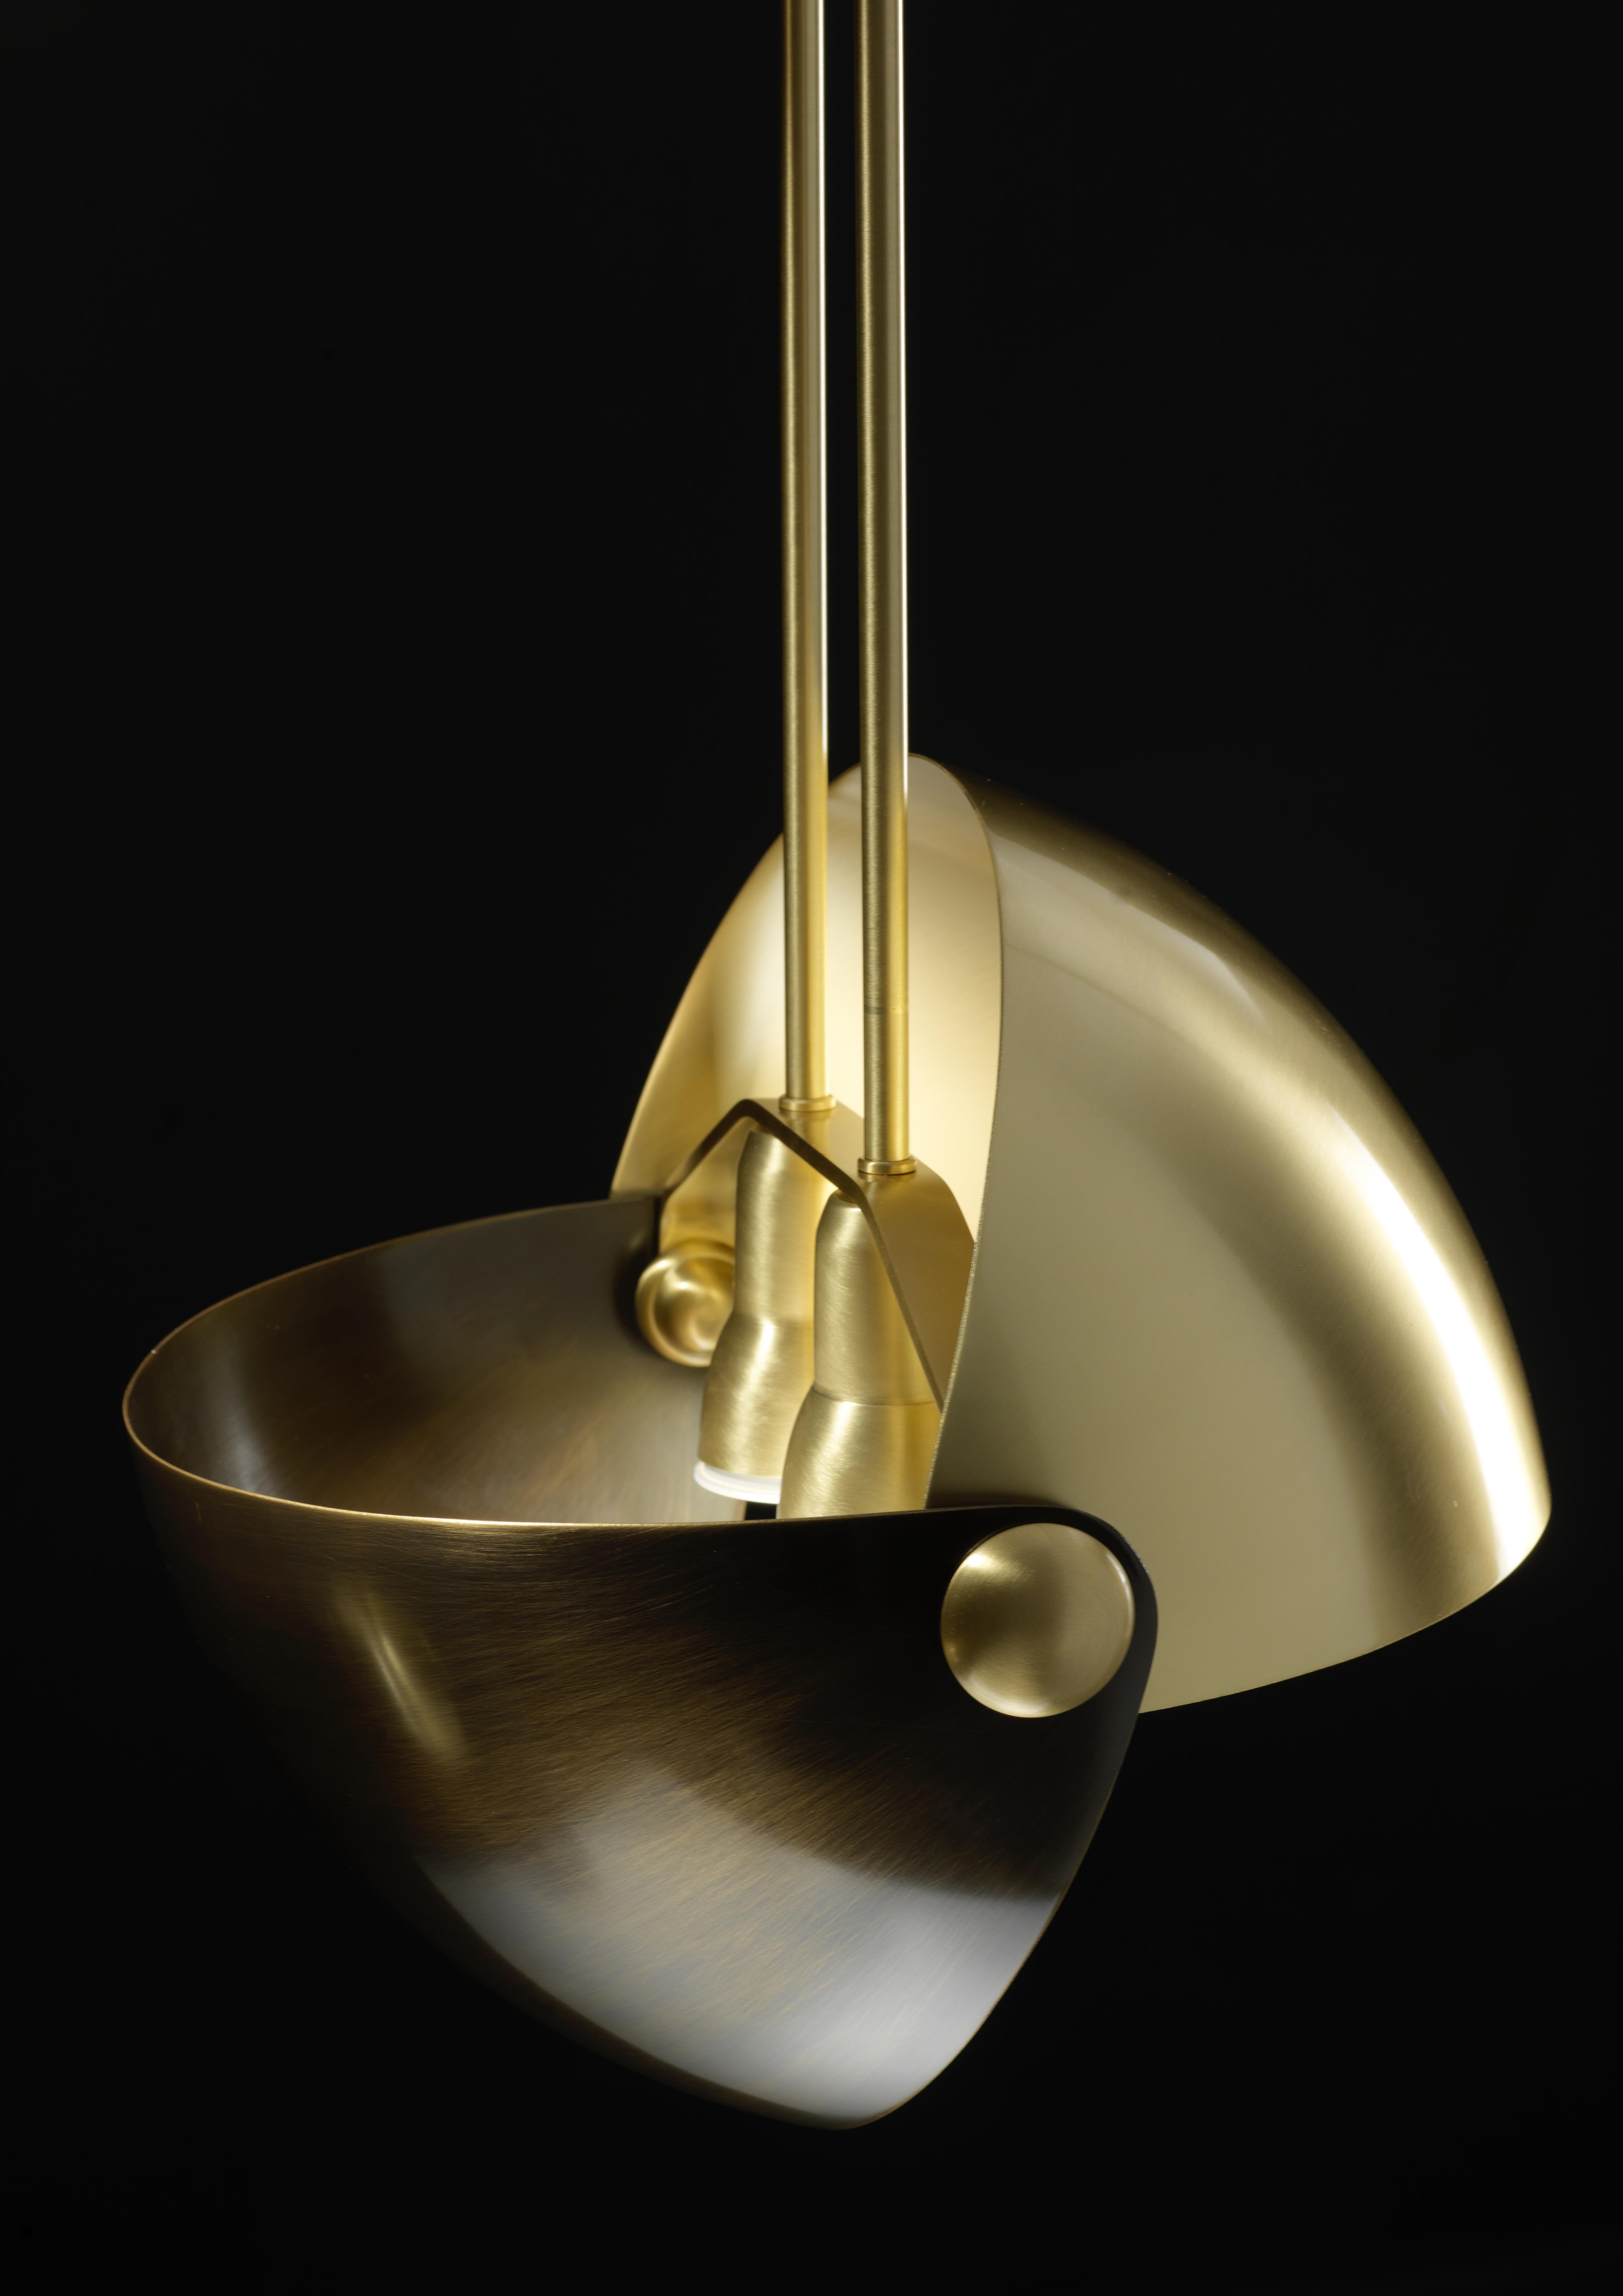 Eirene brass Italian sconce lamp by Esperia
Eirene- lamp made entirely of brass. It is adjustable to obtain various configurations. Available in suspension, floor and wall version.
Suspension and floor version diameter: 32 cm
Materials: Satin